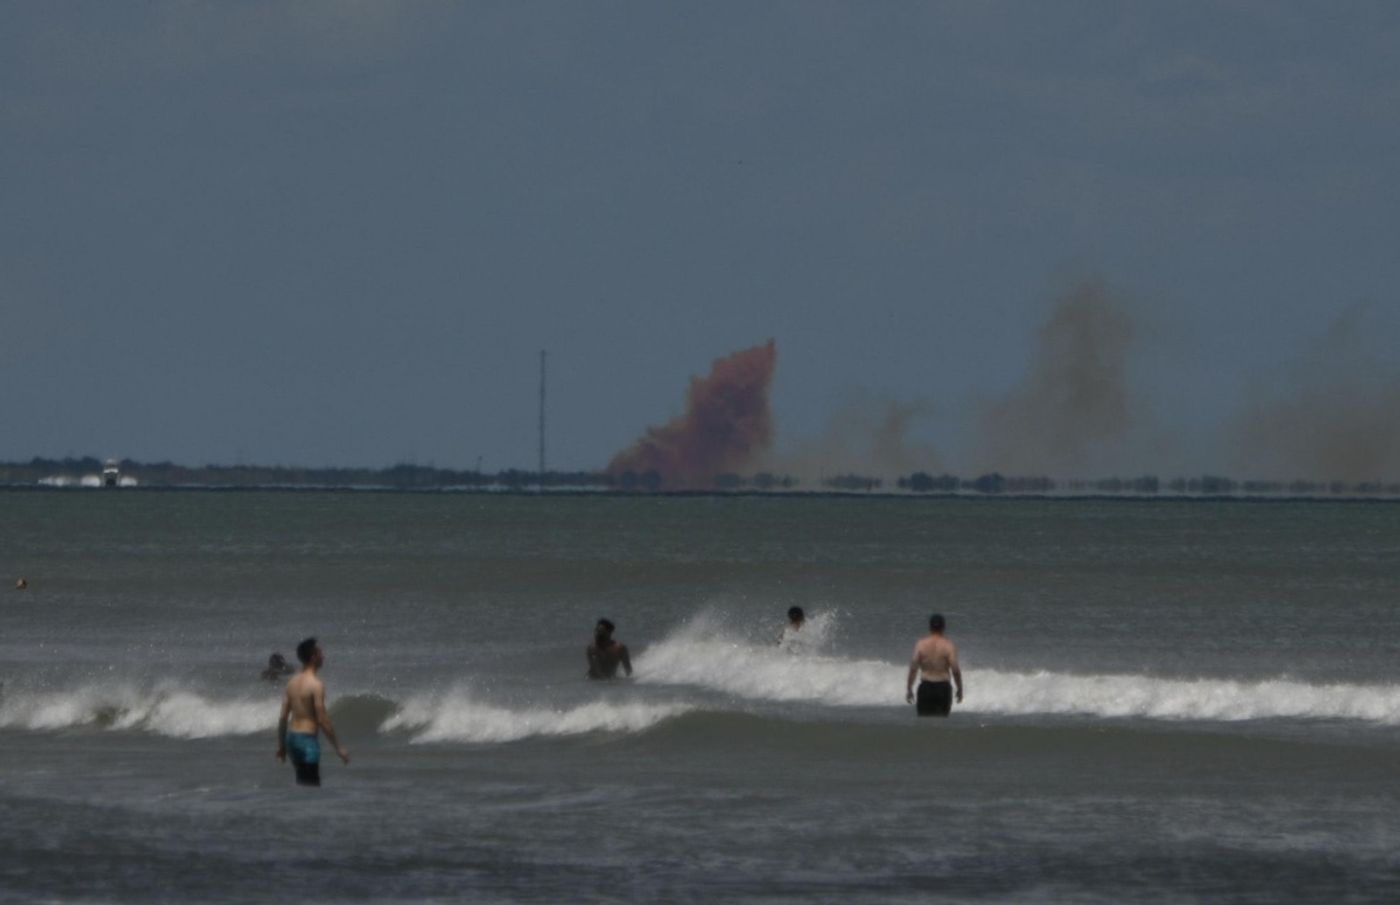 An image of the smoke originating from the SpaceX Crew Dragon capsule on Saturday.